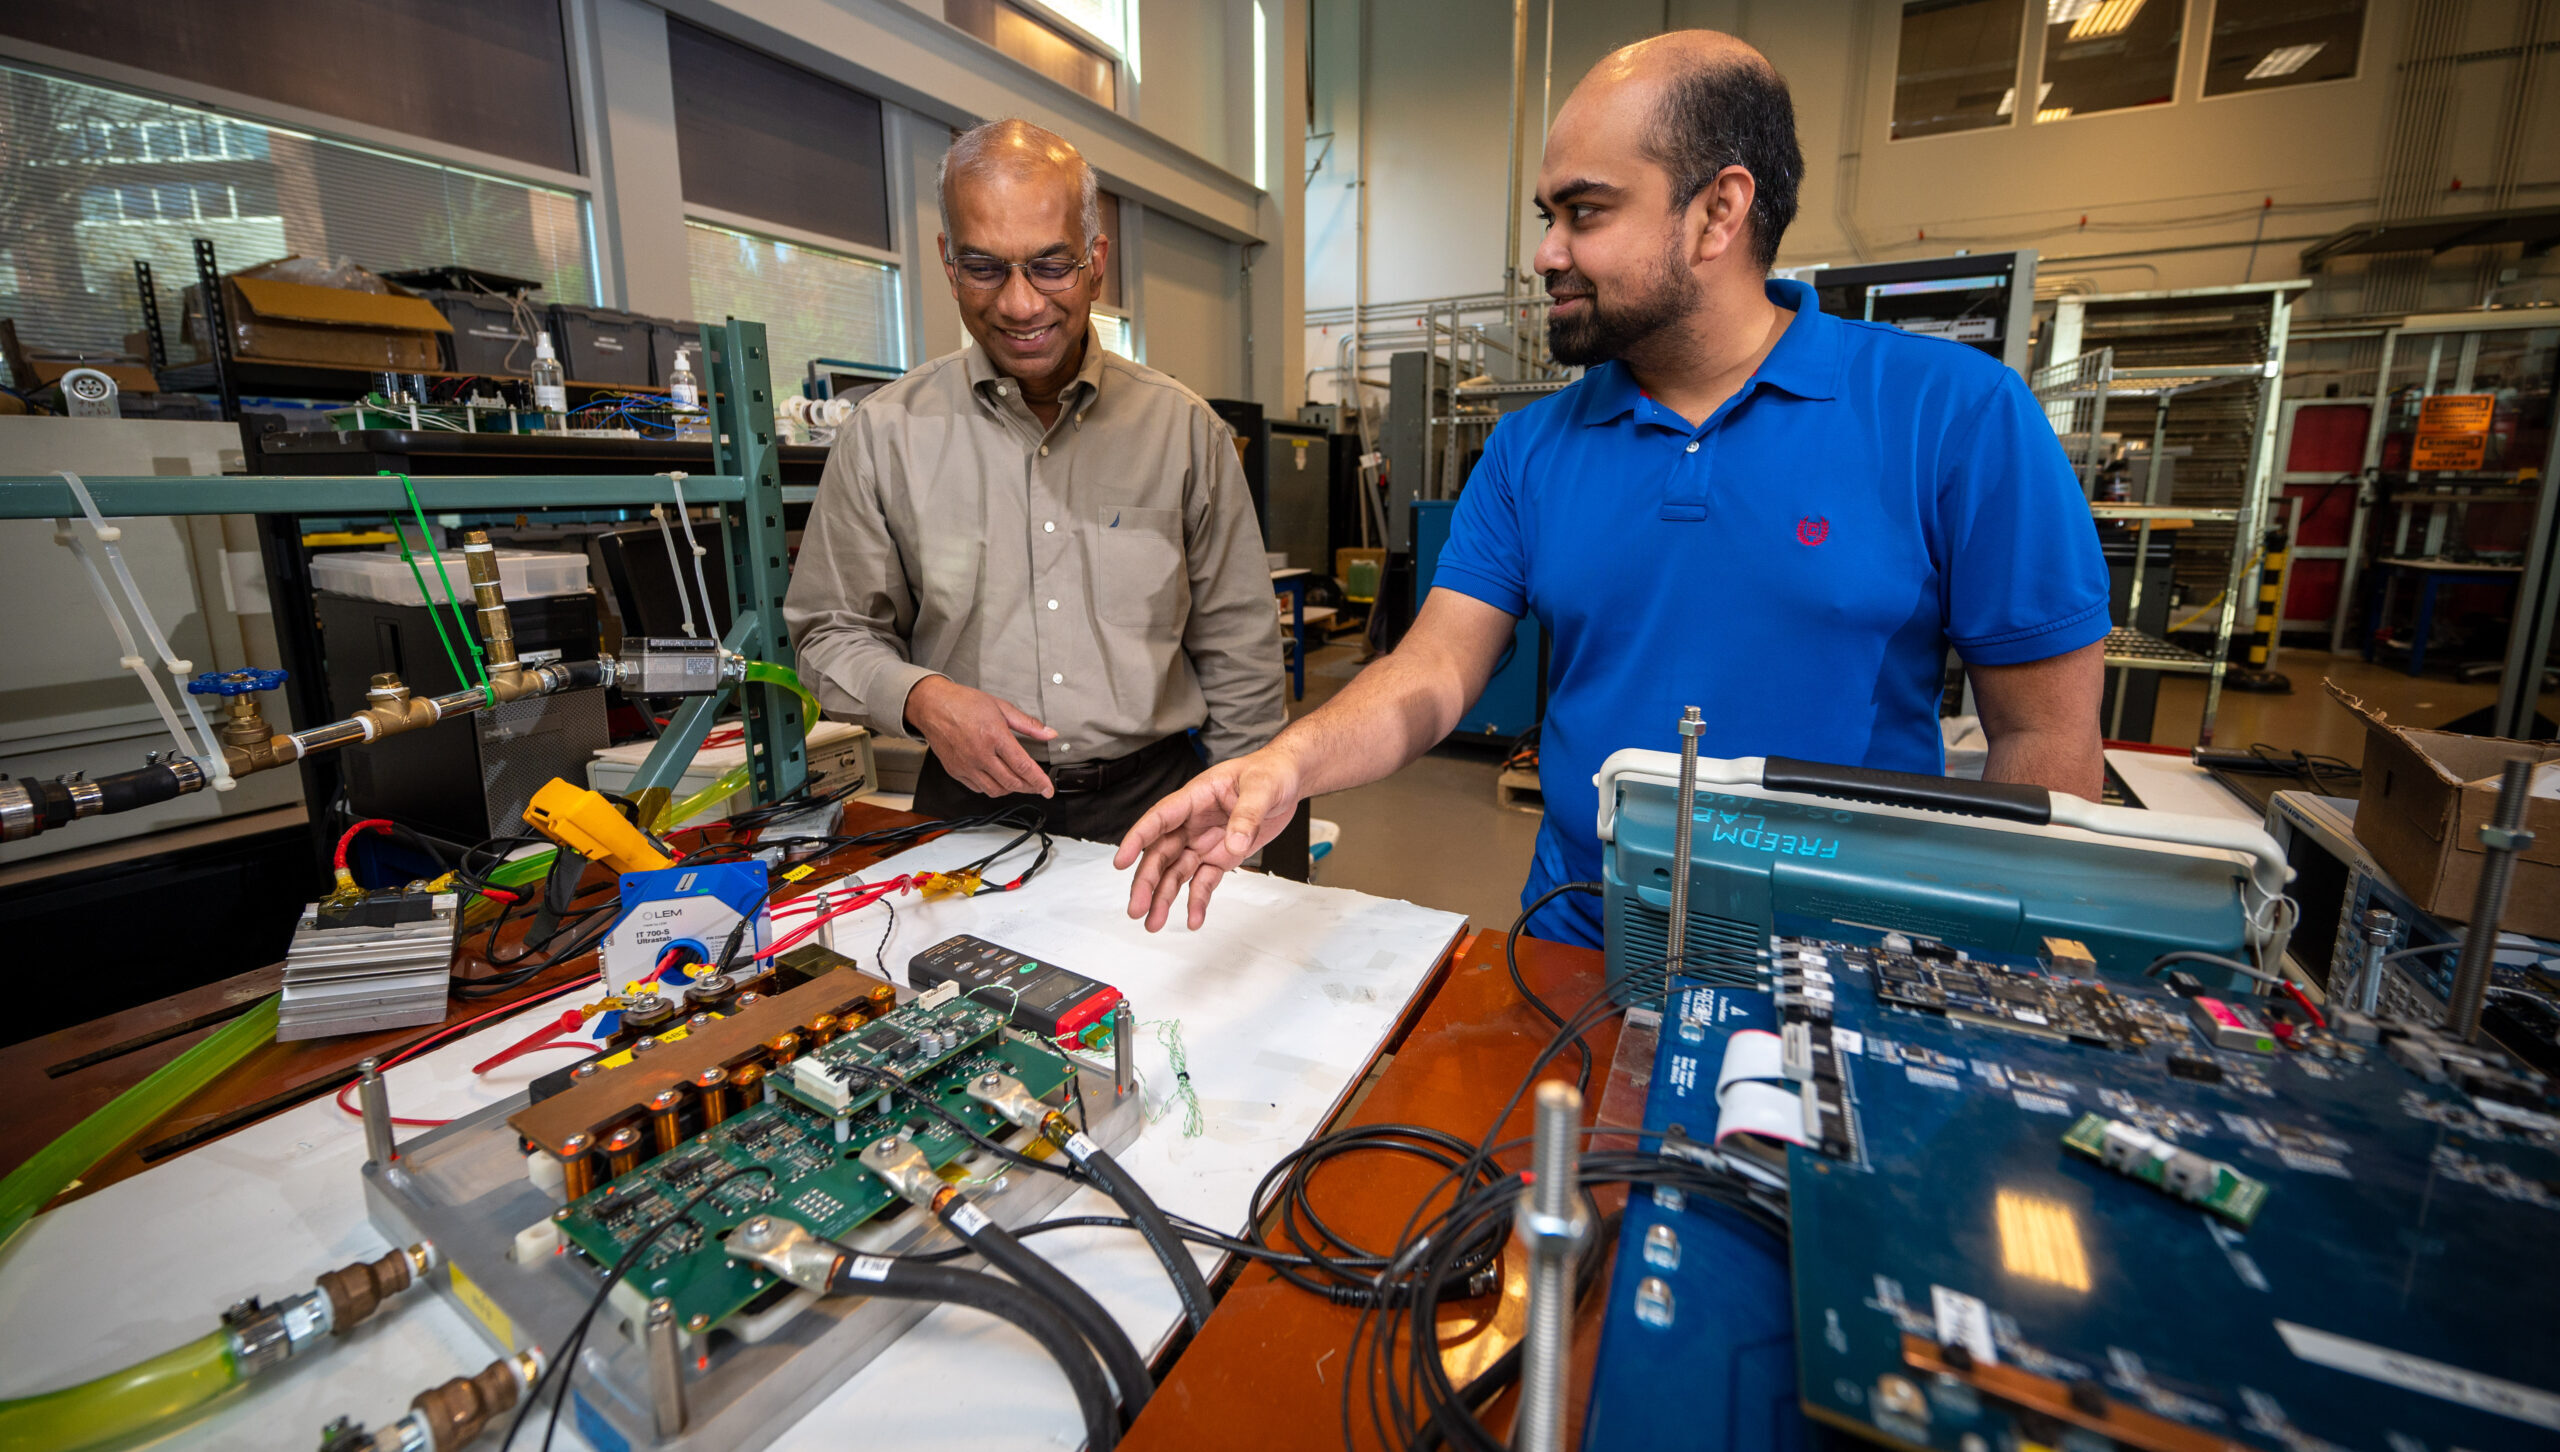 lqbal Husain works with a graduate student inside of the FREEDM Center on Centennial campus.